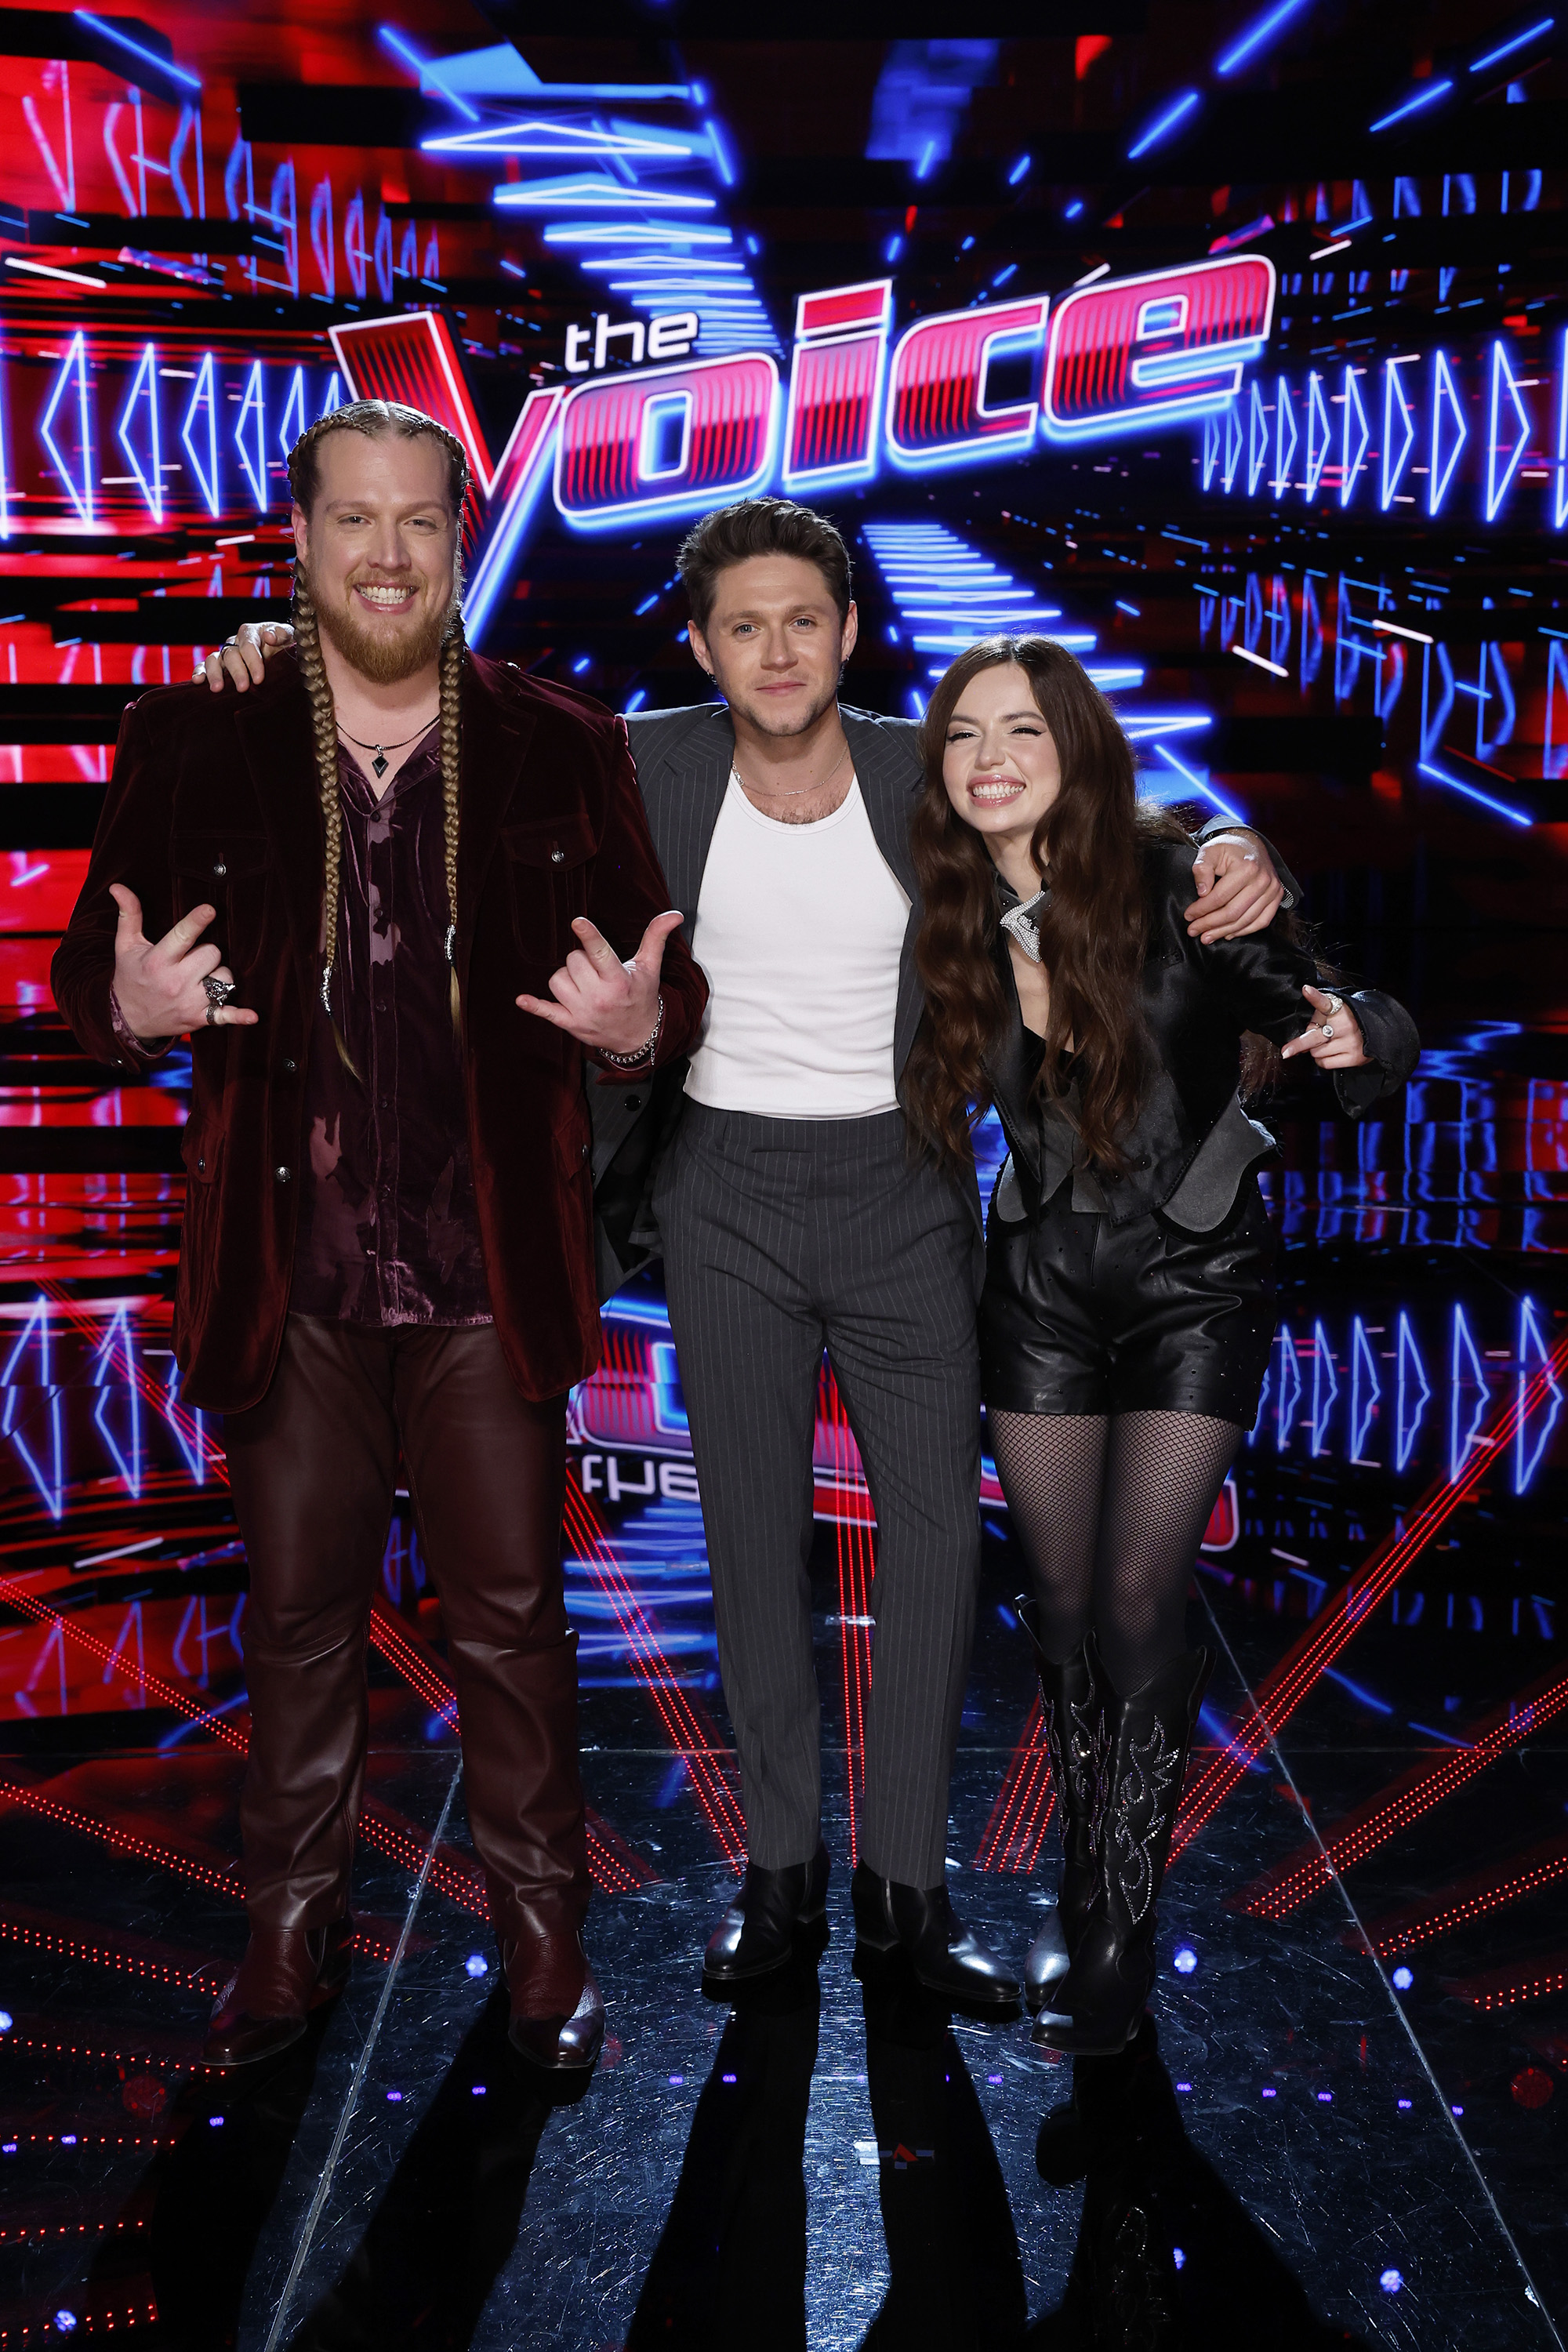 The Voice's Mara Justine pictured with her coach Niall Horan and fellow contestant, Huntley